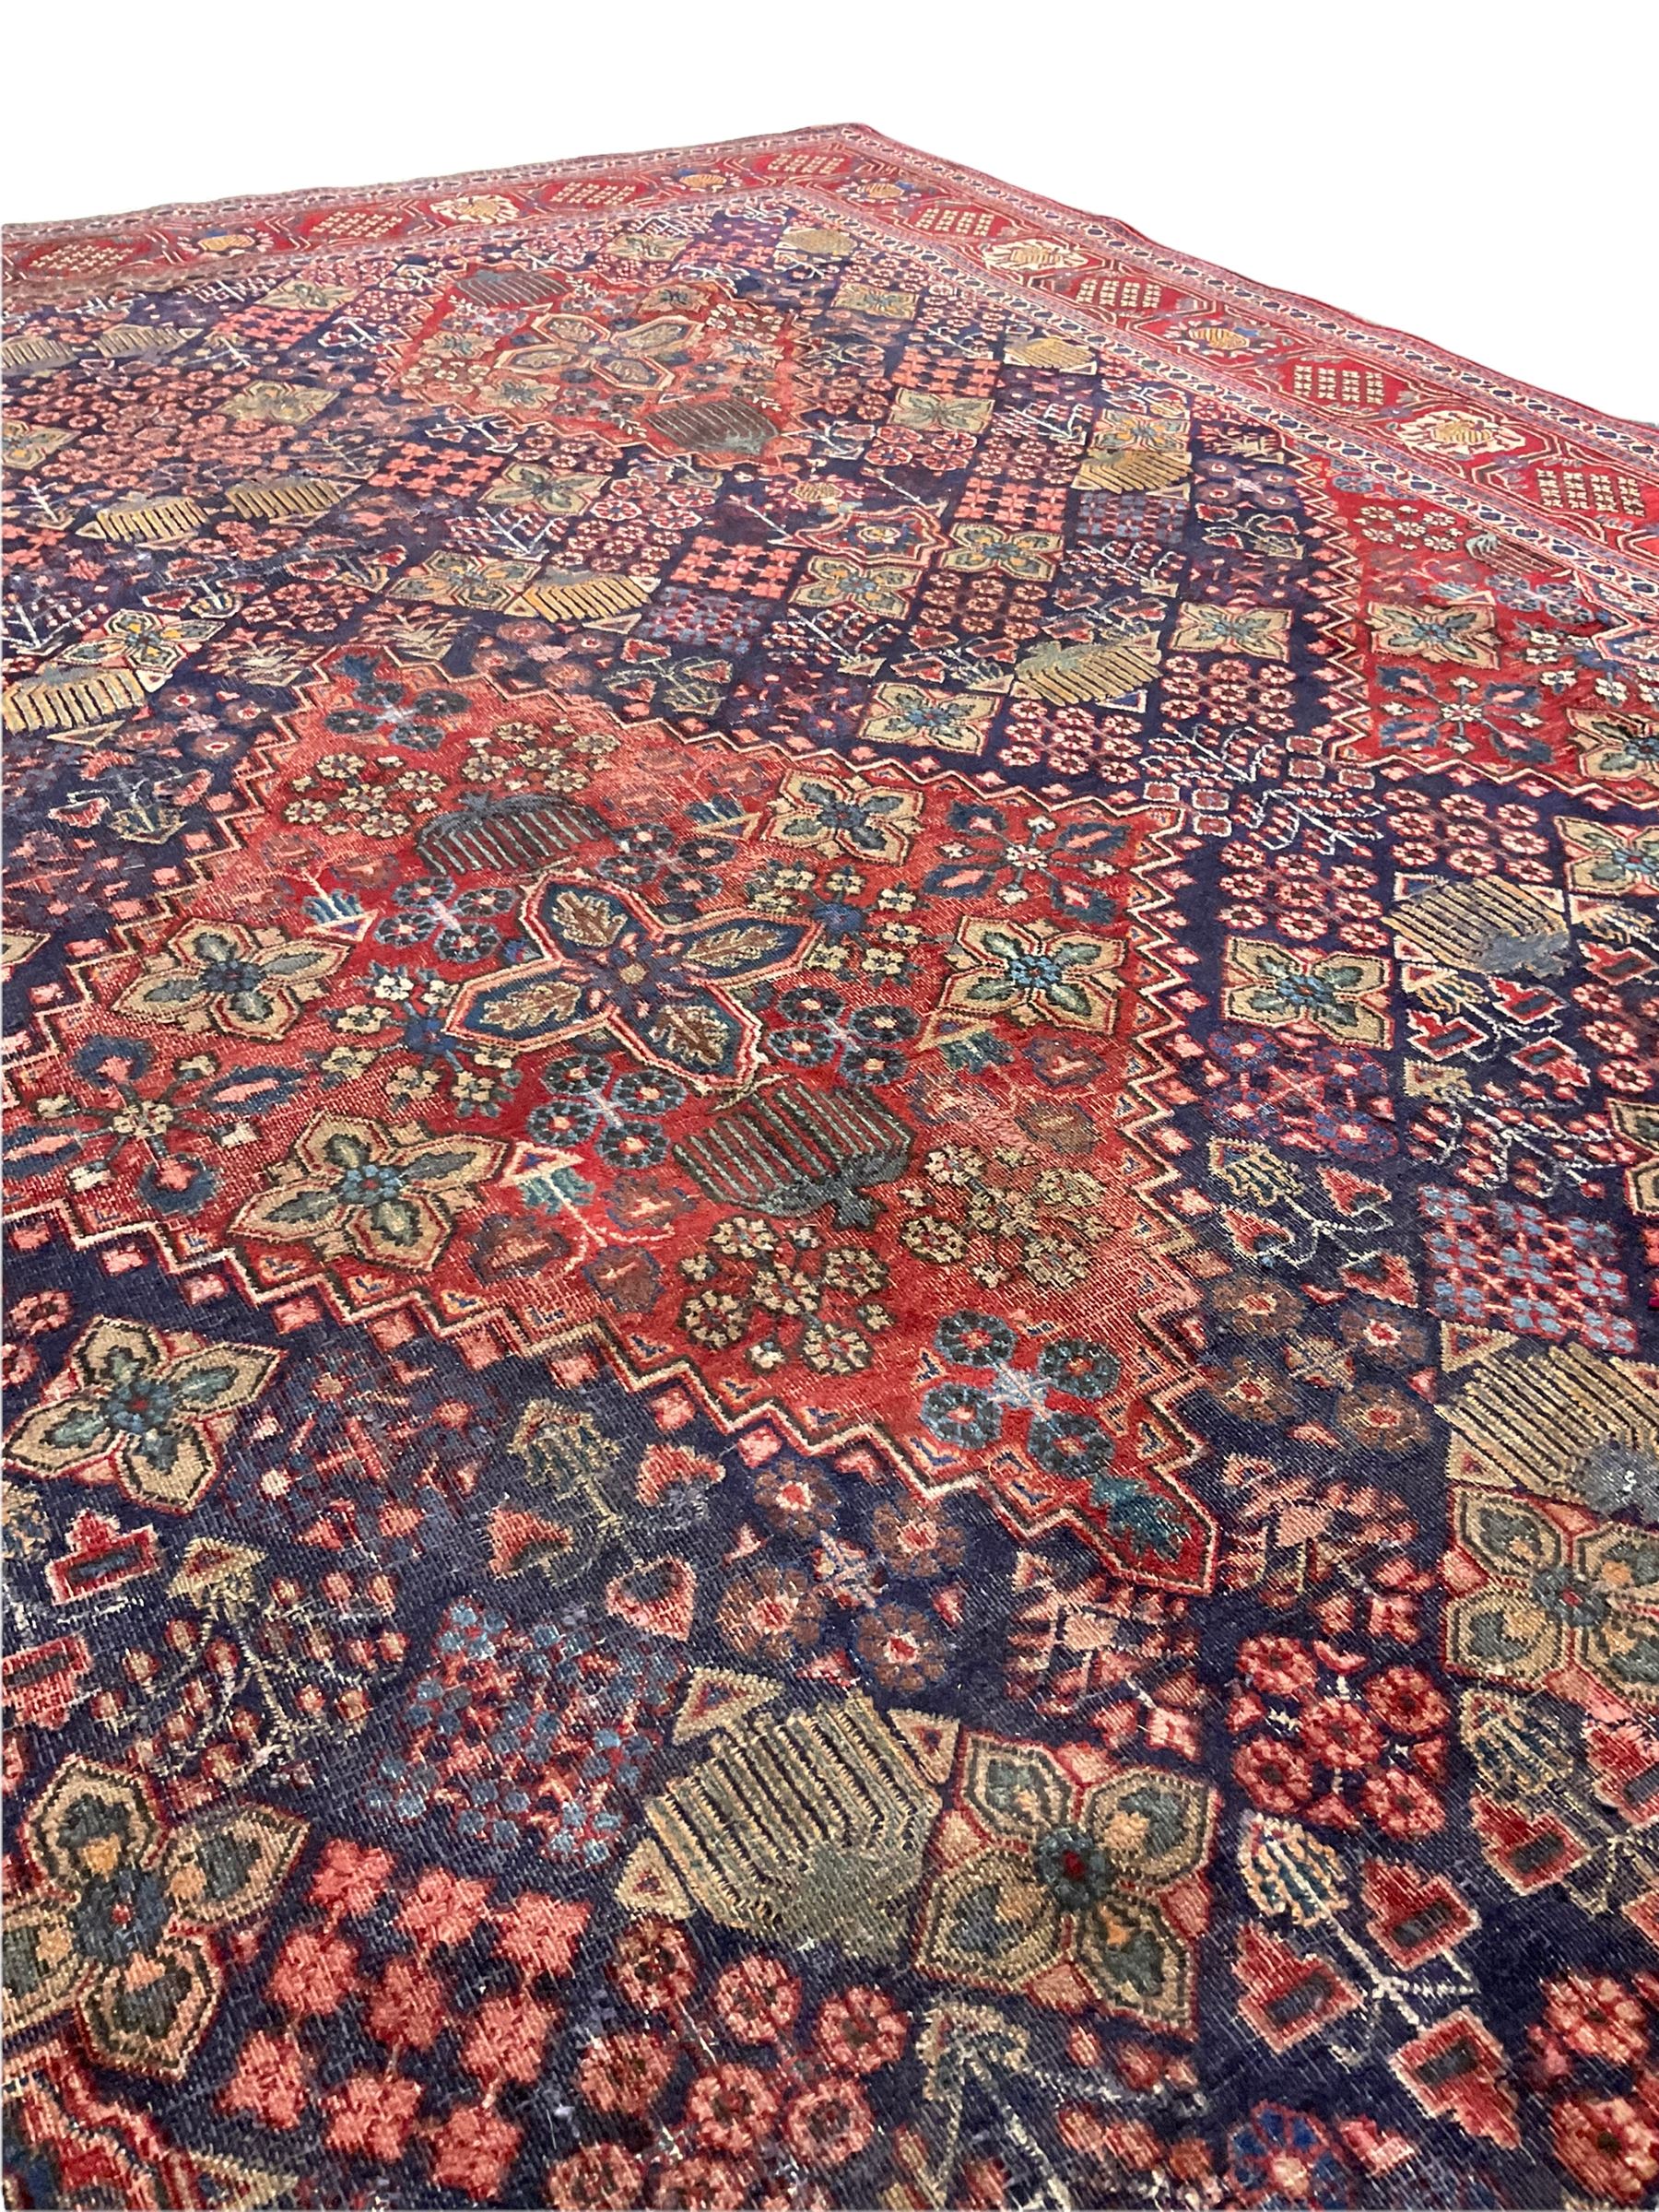 Handknotted Persian rug from Sanandaj region with five red medallions - Image 4 of 7